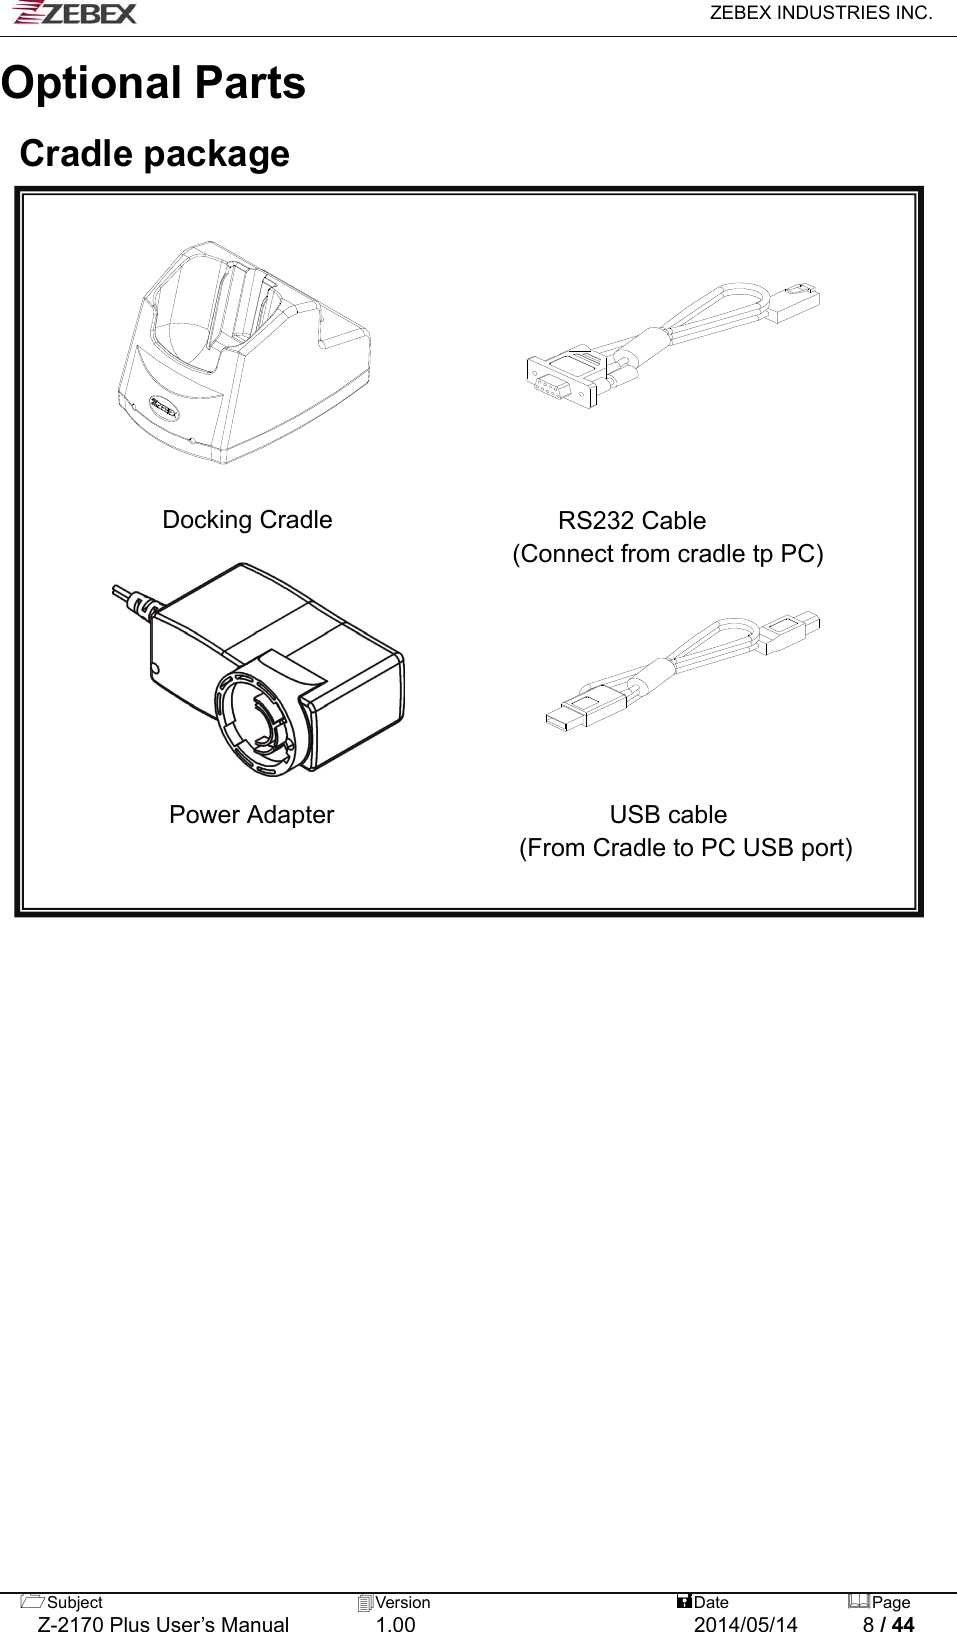   ZEBEX INDUSTRIES INC.  Subject  Version   DatePage   Z-2170 Plus User’s Manual  1.00  2014/05/14  8 / 44 Optional Parts  Cradle package           Docking Cradle                  RS232 Cable (Connect from cradle tp PC)                                     Power Adapter                      USB cable  (From Cradle to PC USB port)       